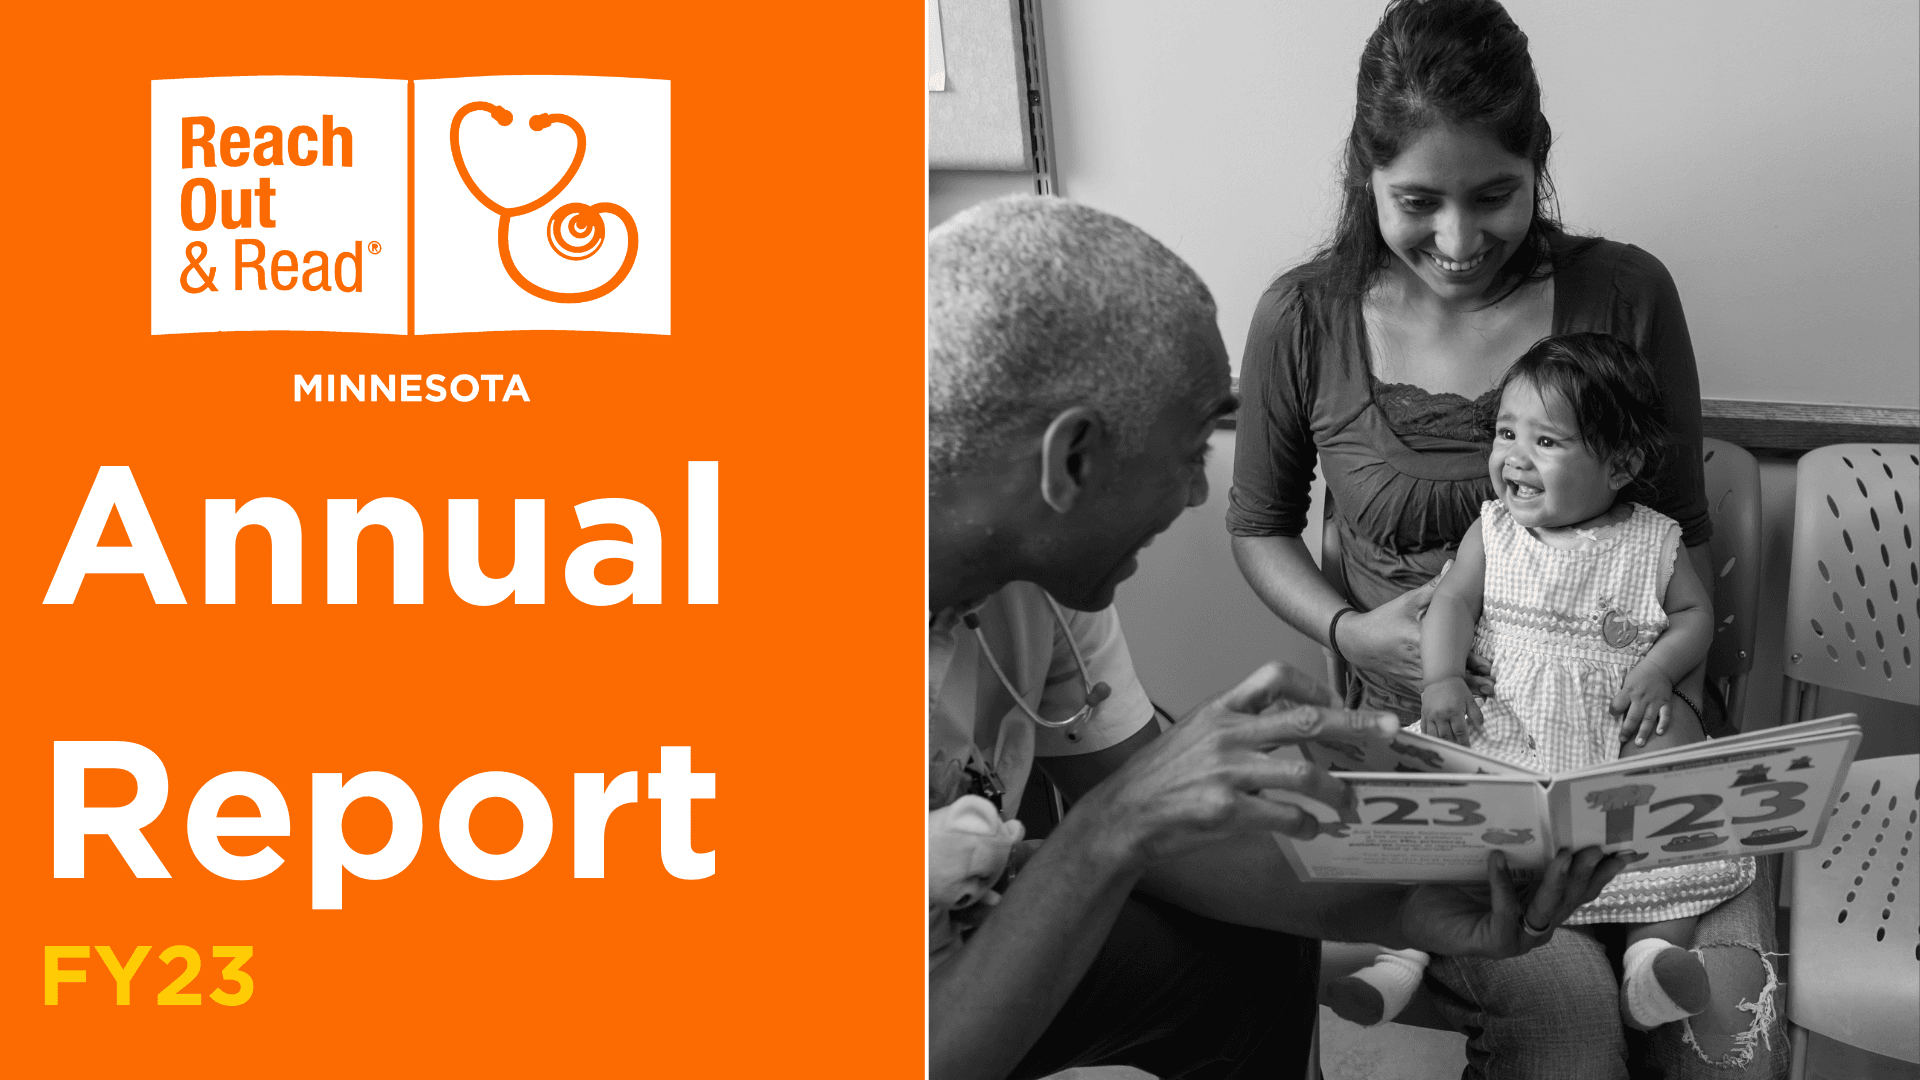 Left side of image has the Reach Out and Read Minnesota logo and the text "Annual Report FY23." Right side has a picture of a doctor and baby smiling at each other over a book, while the baby sits on her mother's lap.